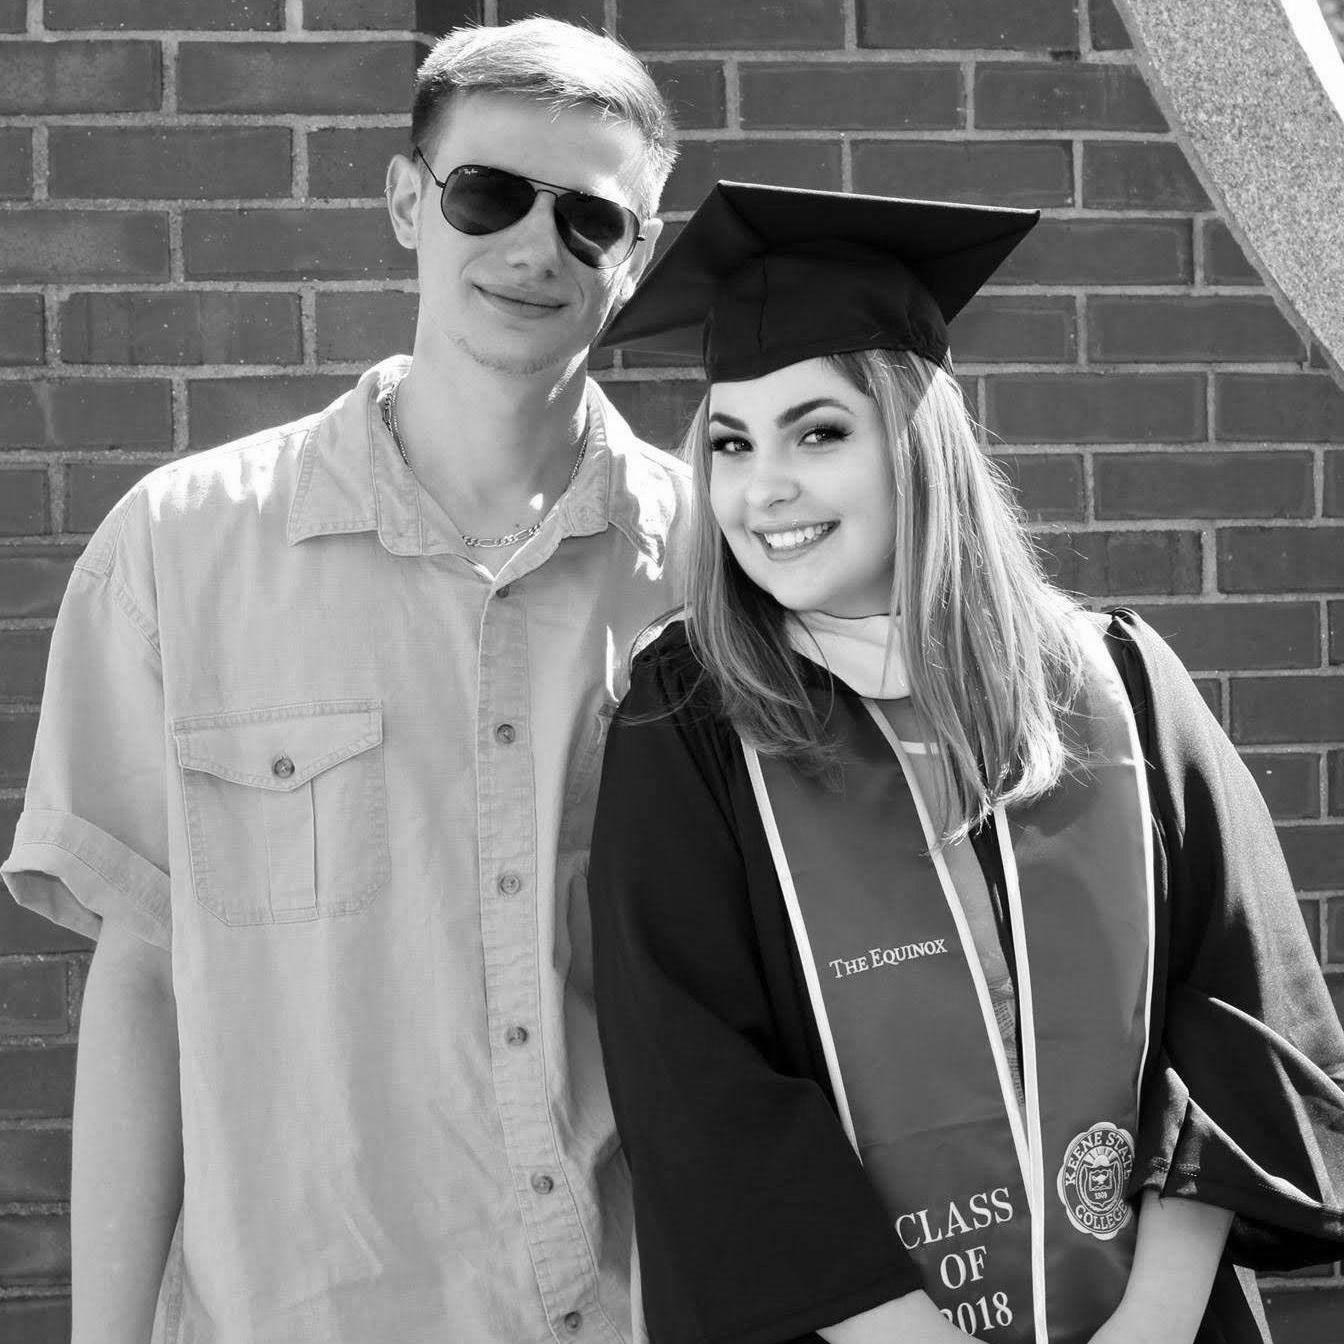 Chloe's graduation from Keene State College | May 2018